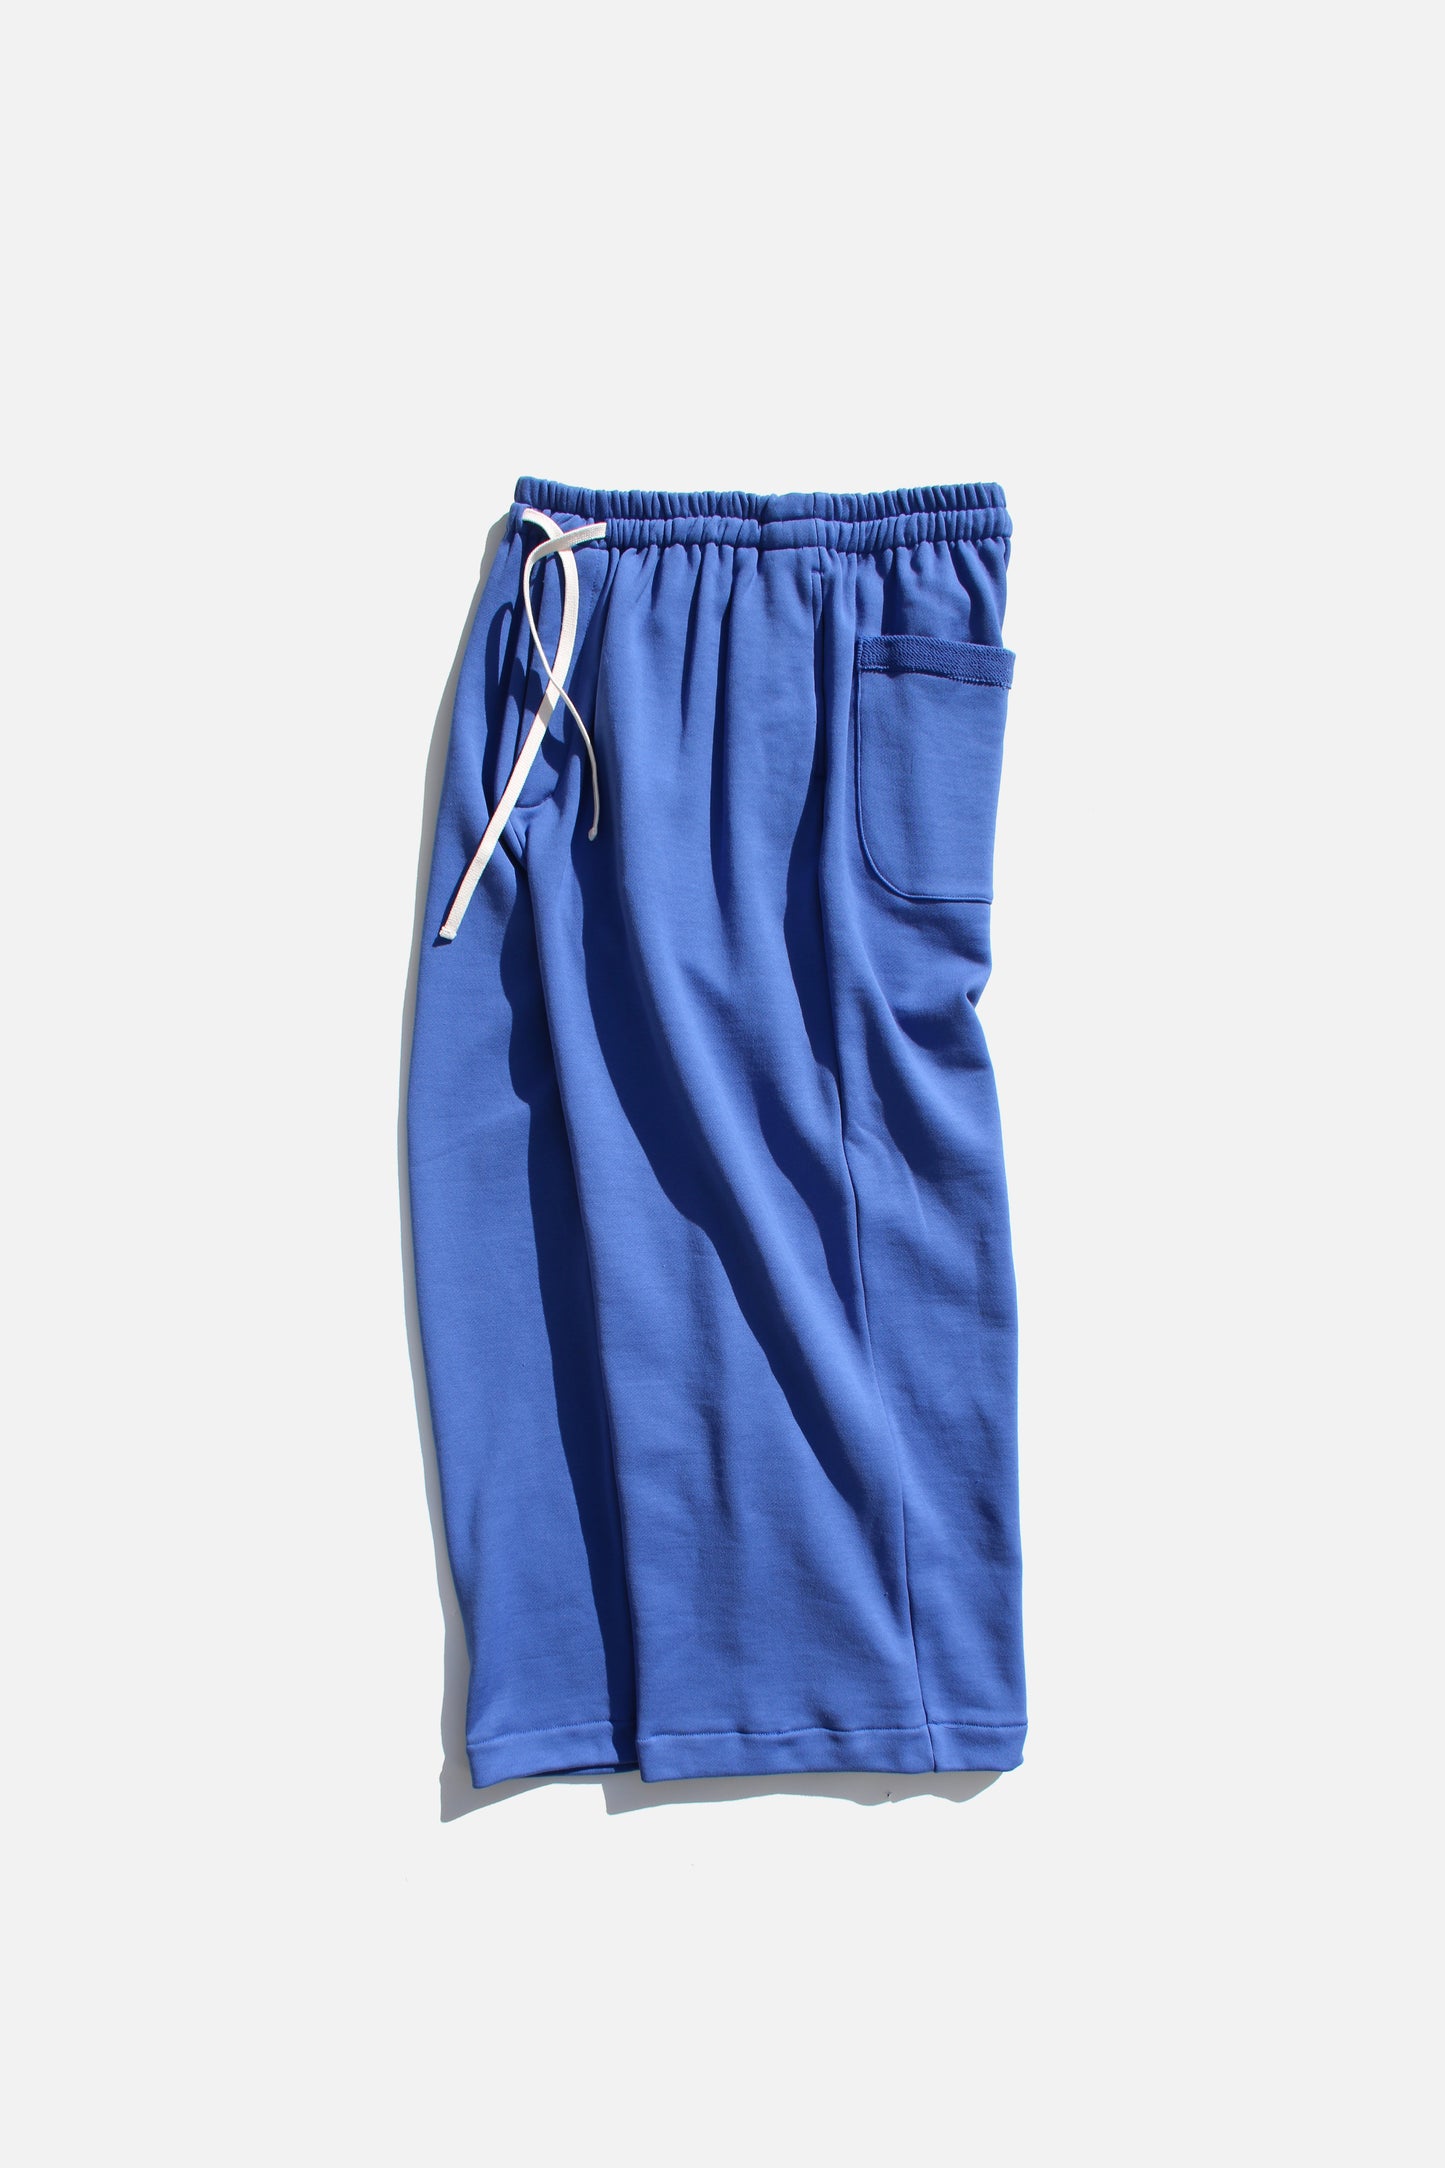 MY BEAUTIFUL LANDLET HEAVY FRENCH TERRY SWEATPANTS - BLUE